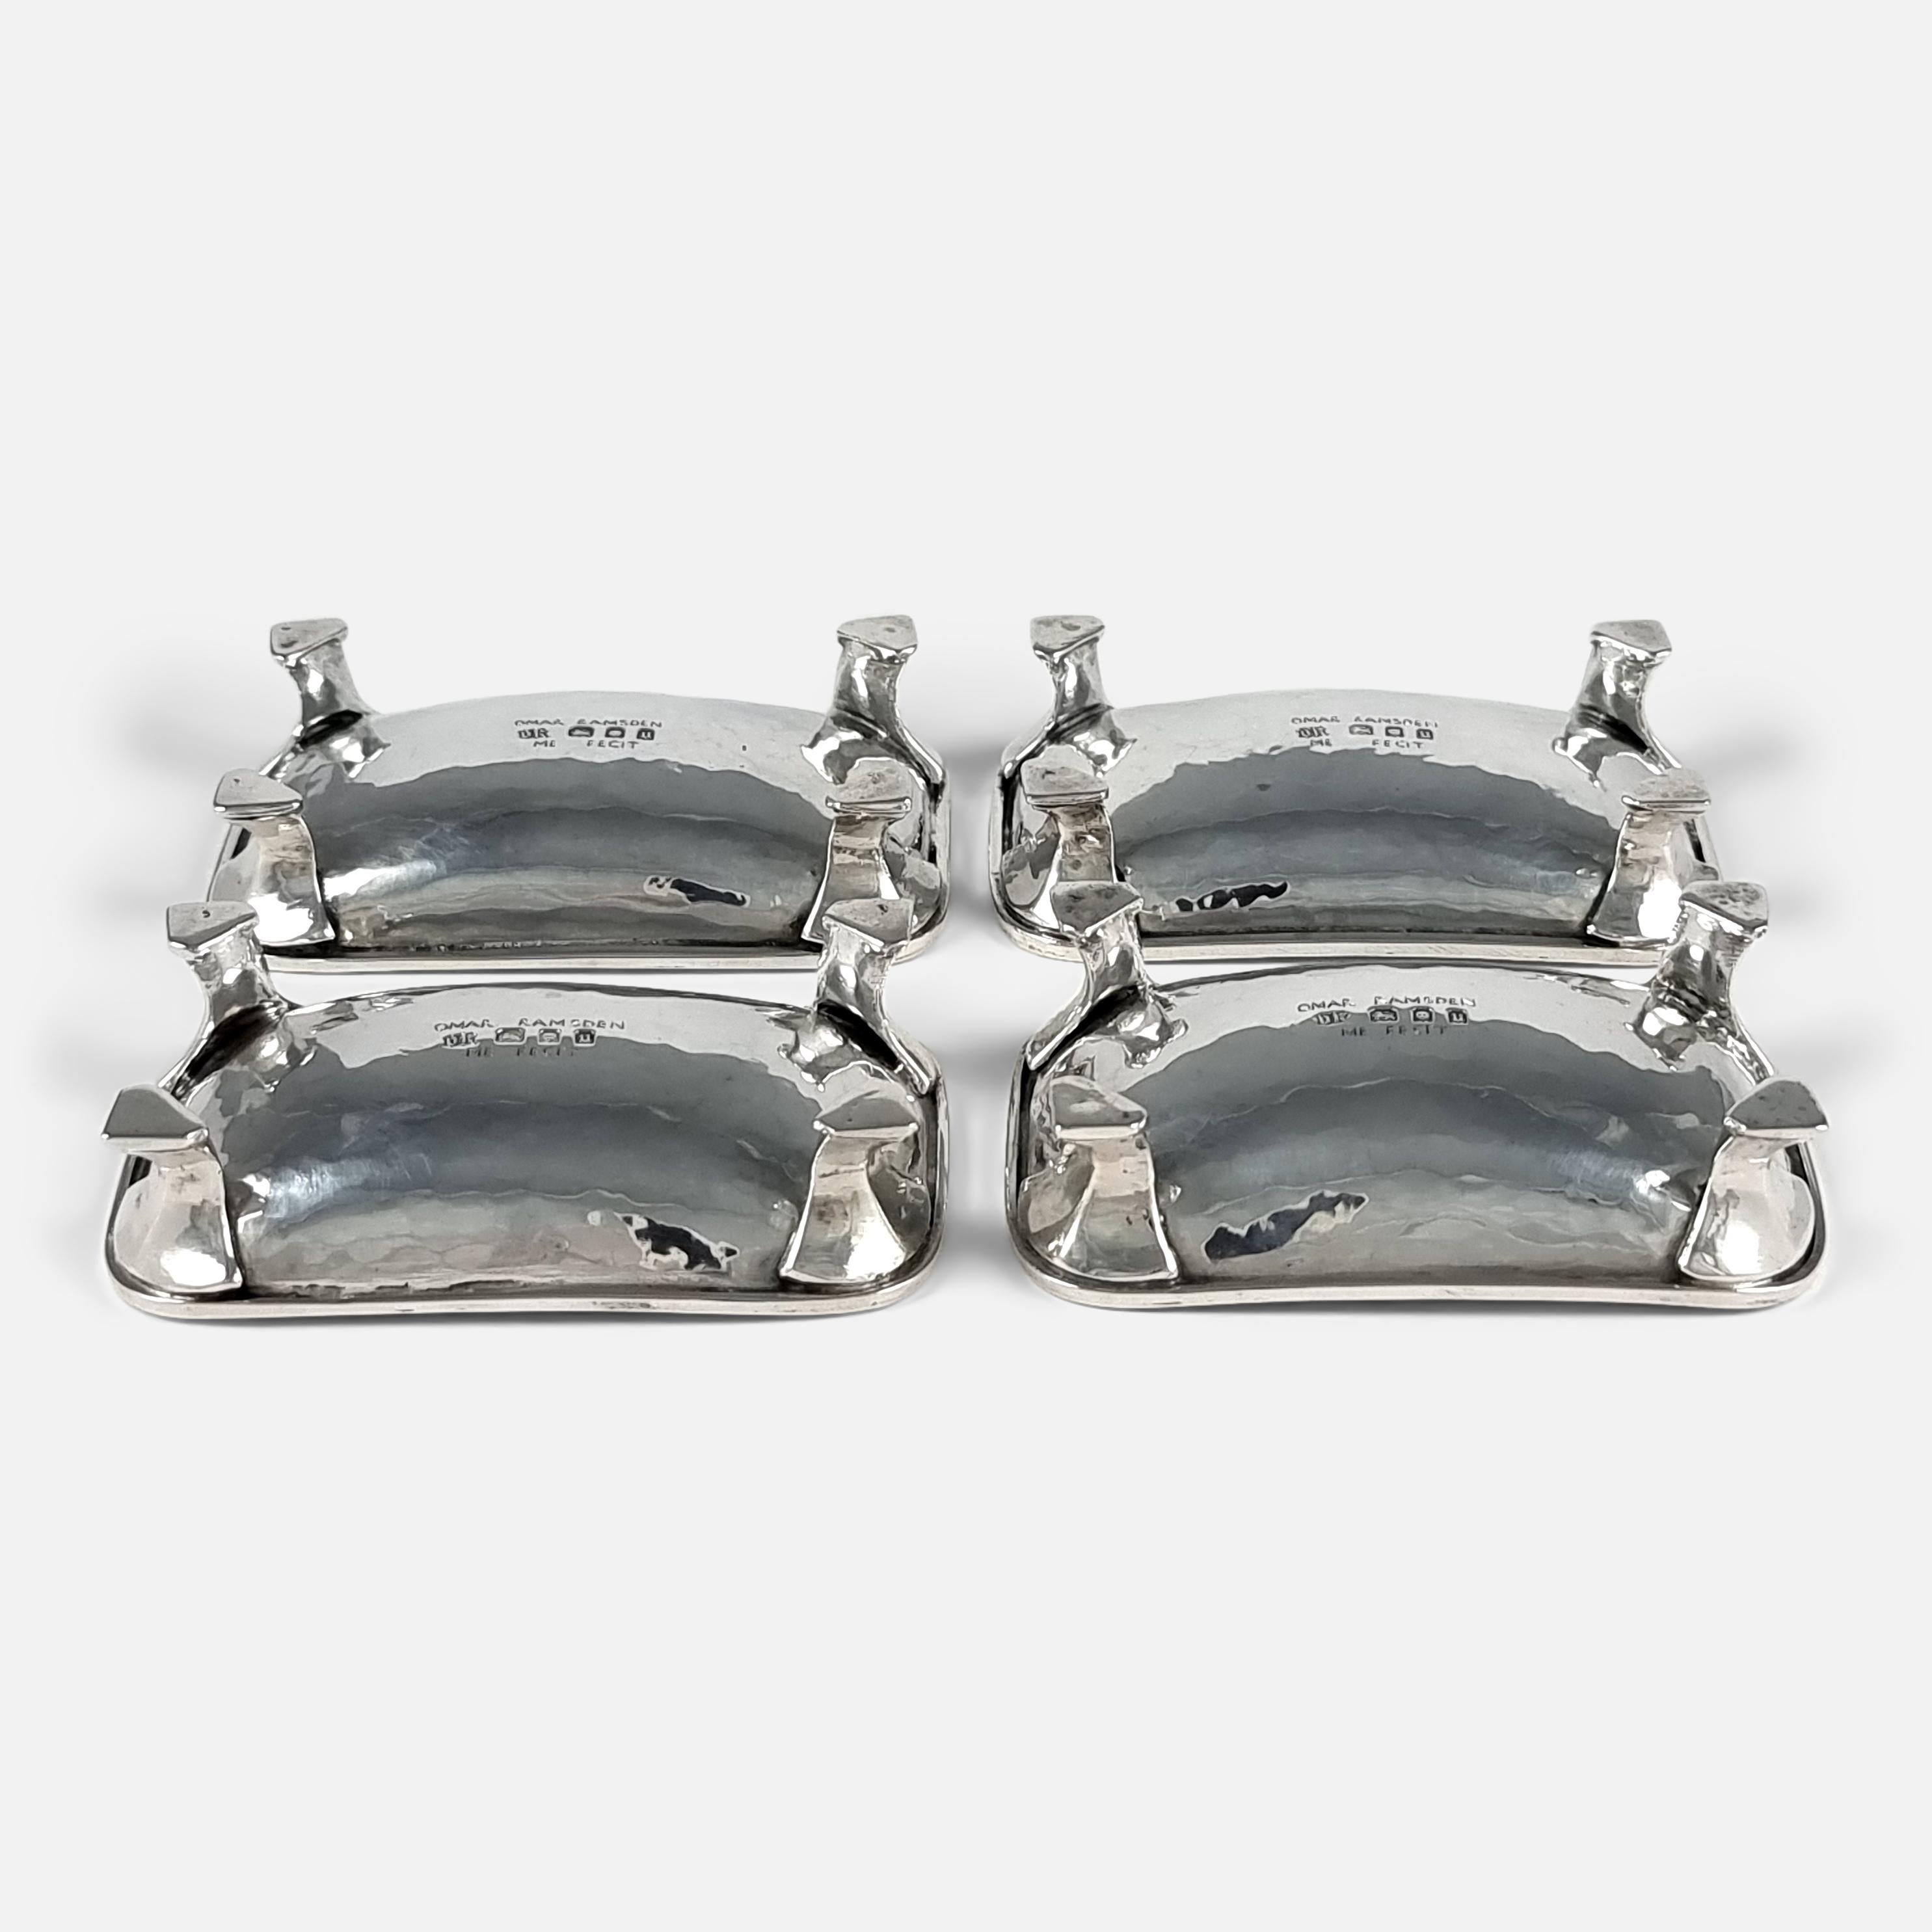 Set of 4 Arts and Crafts Silver Salts, Omar Ramsden, 1935 For Sale 5